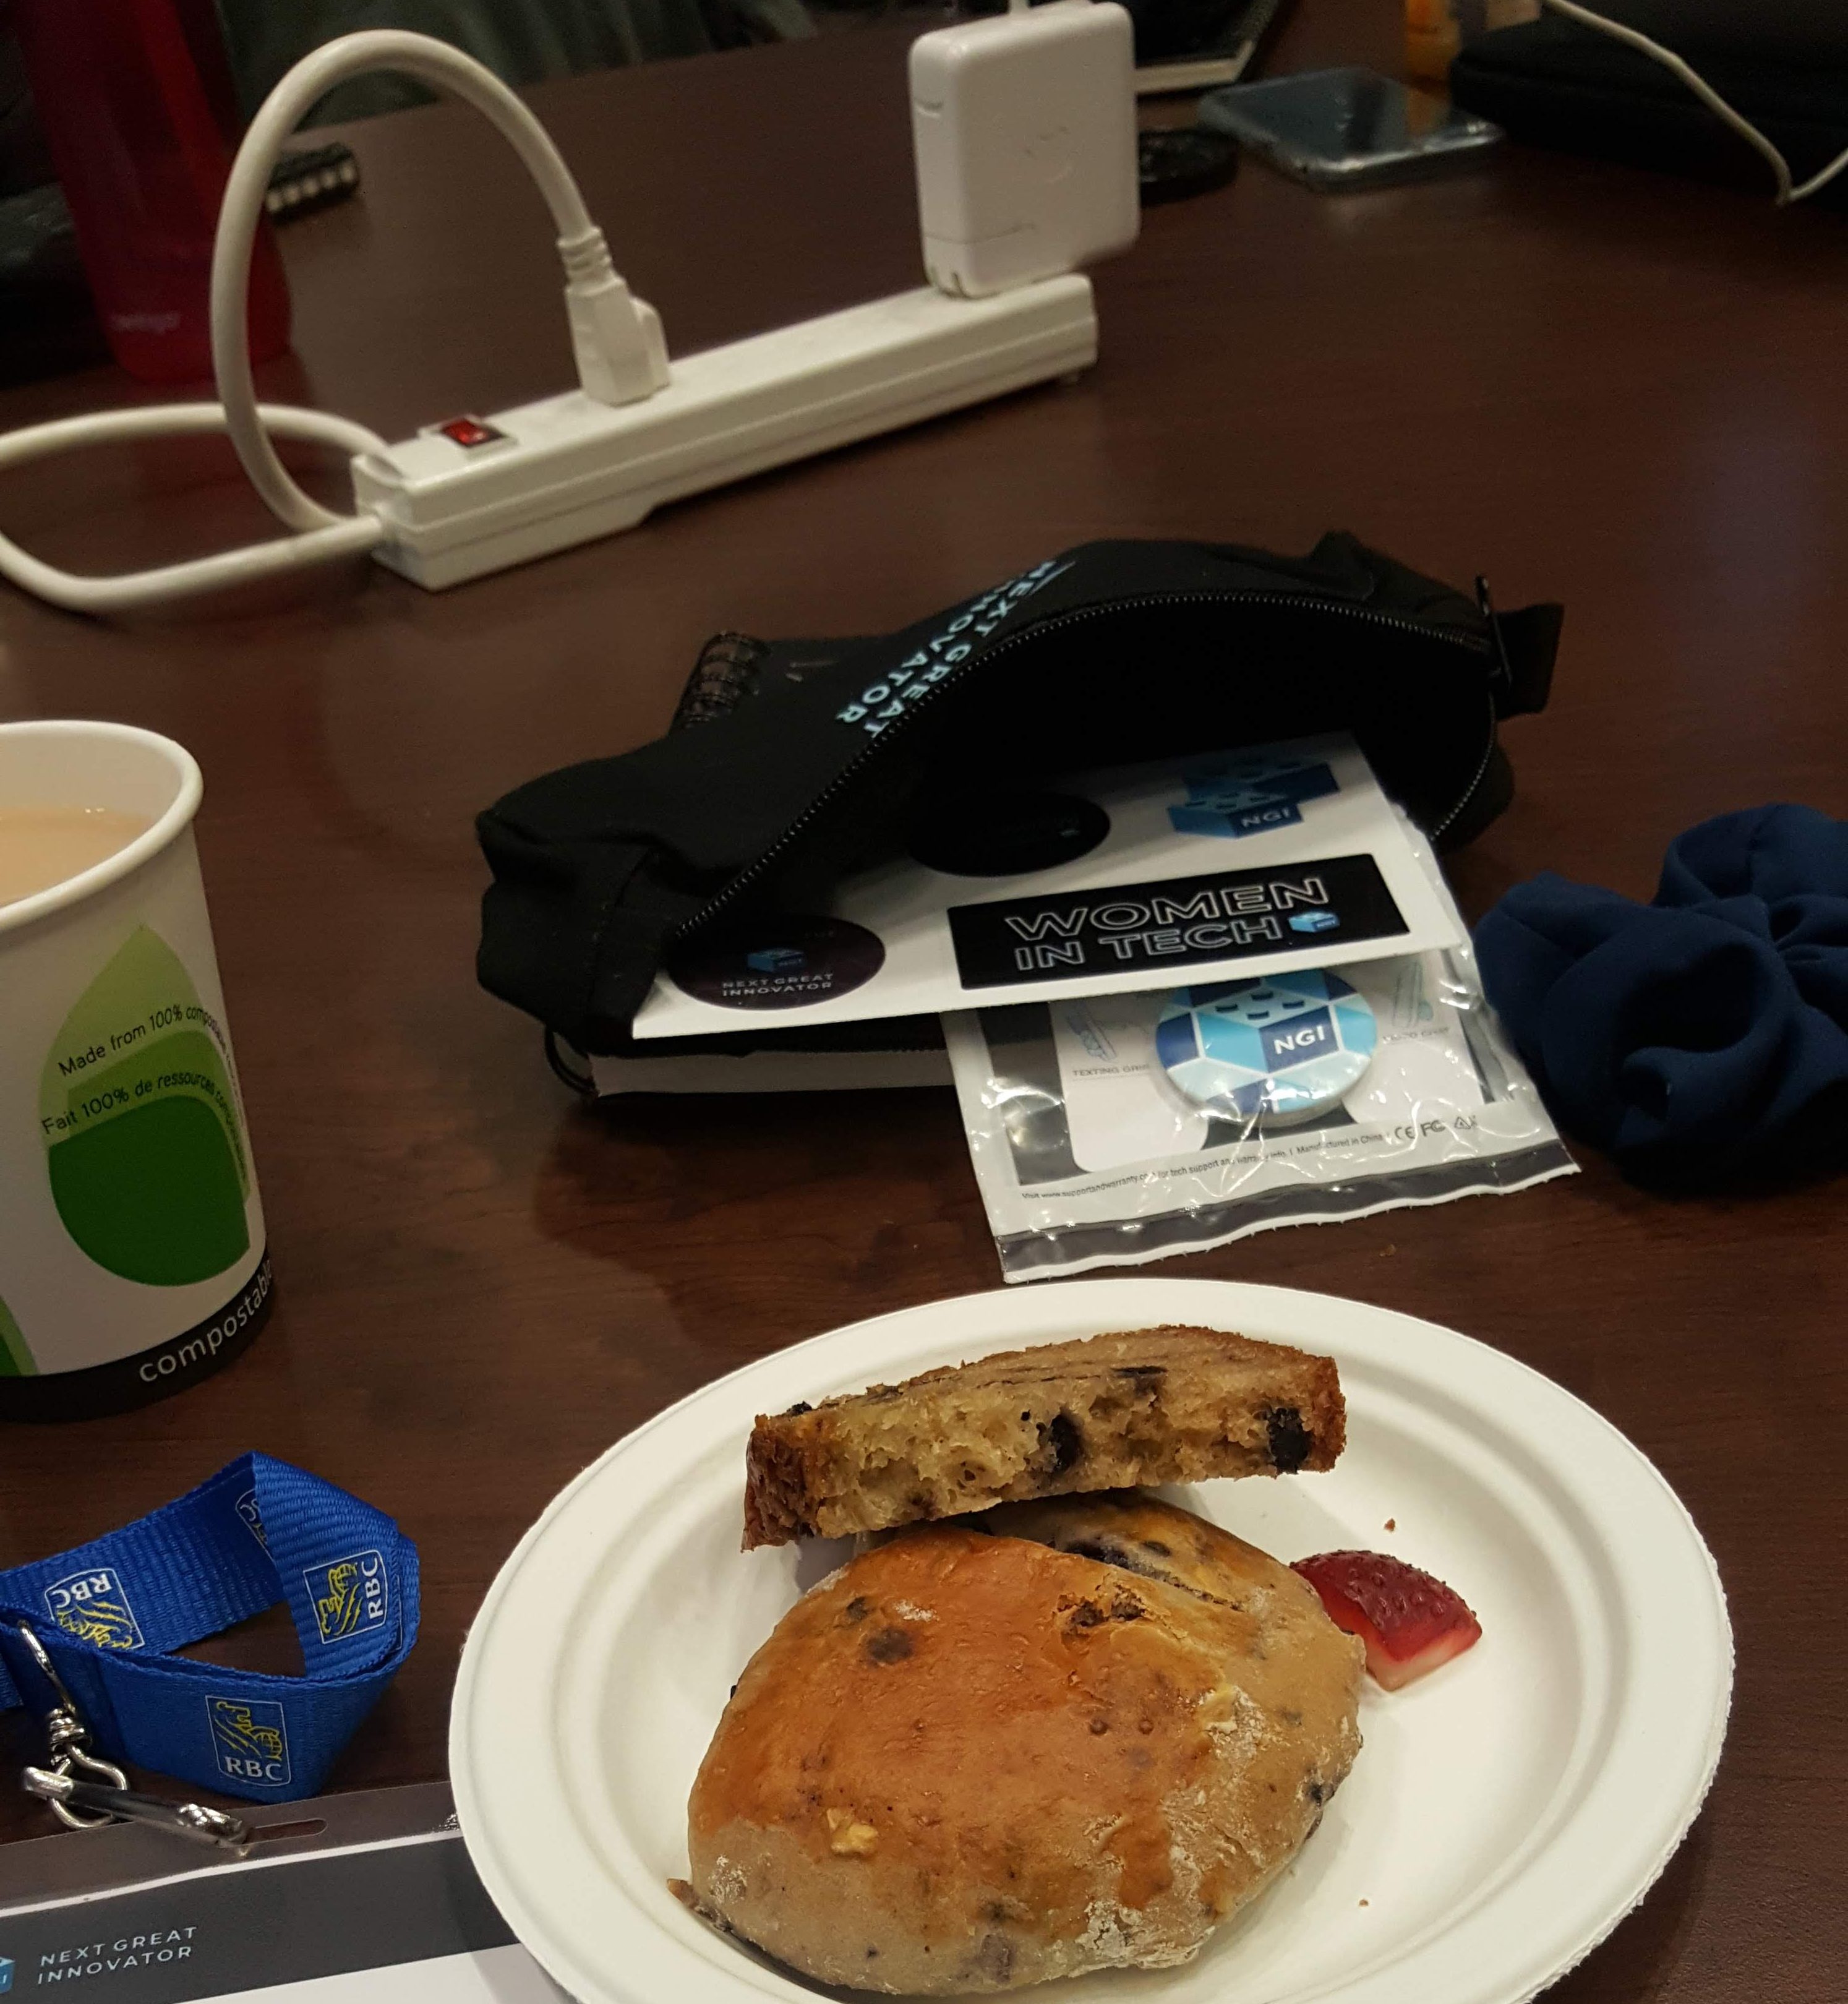 free stuff on table with food